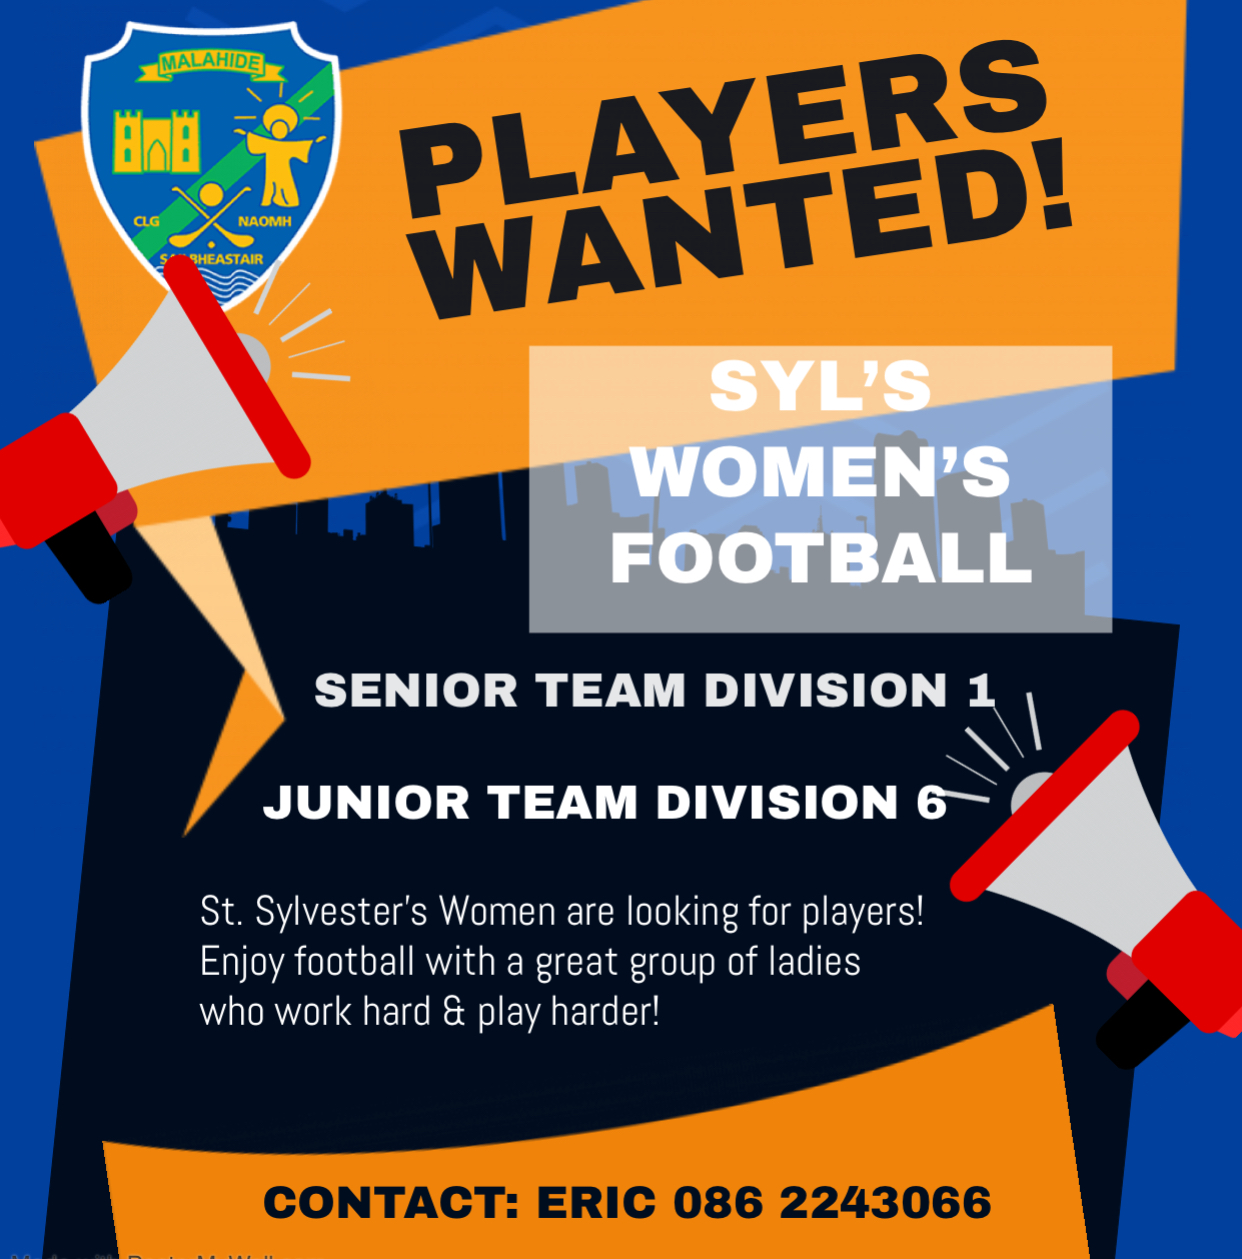 Women’s Teams Looking for Players